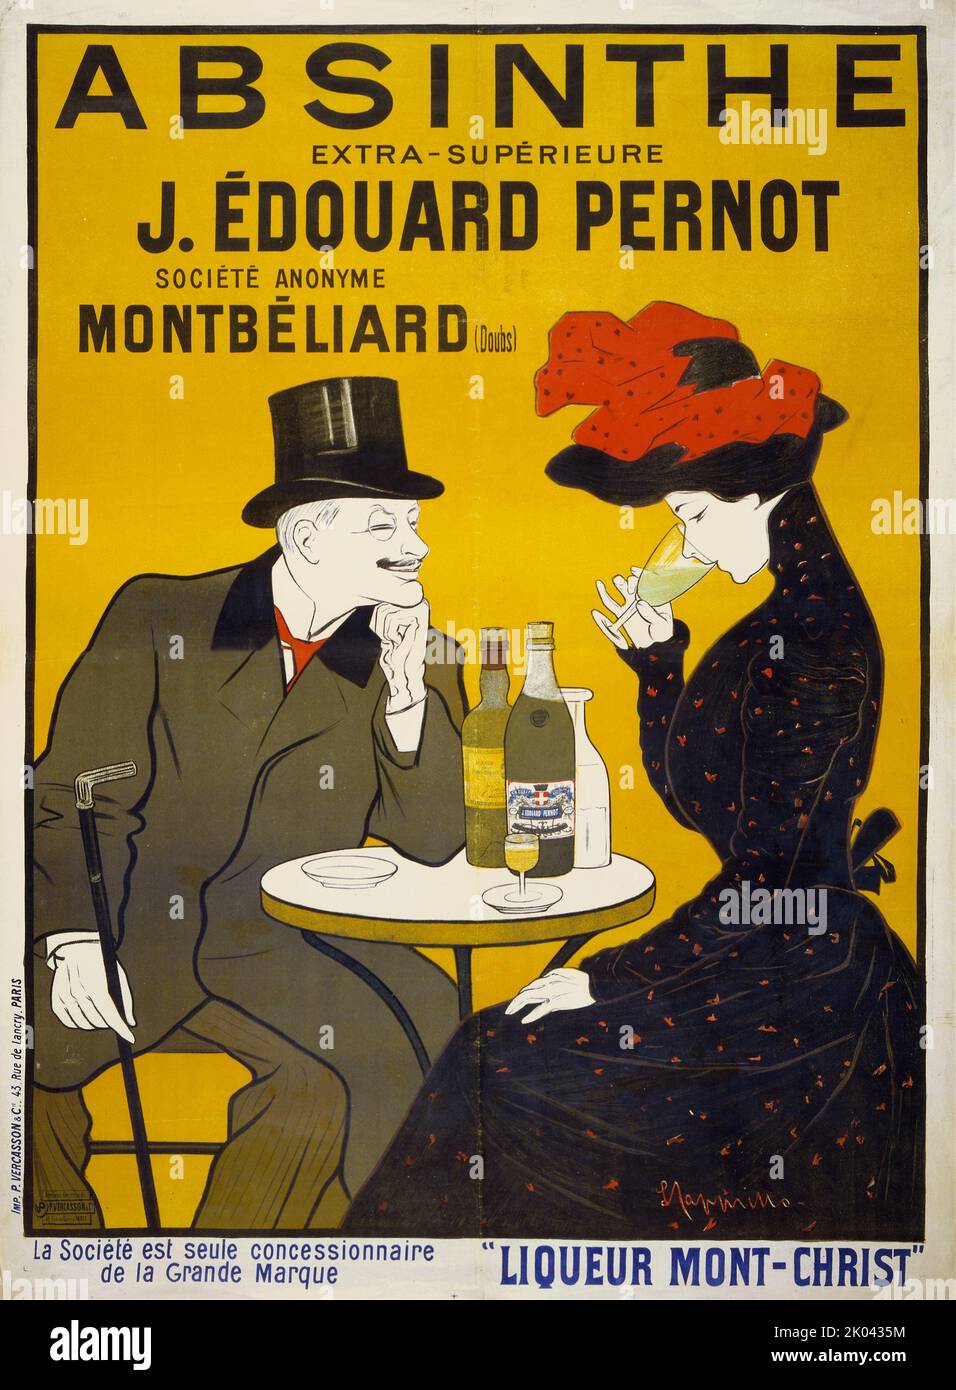 Absinthe extra-sup&#xe9;rieure J. &#xc9;douard Pernot, 1900-1905. Private Collection. Stock Photo